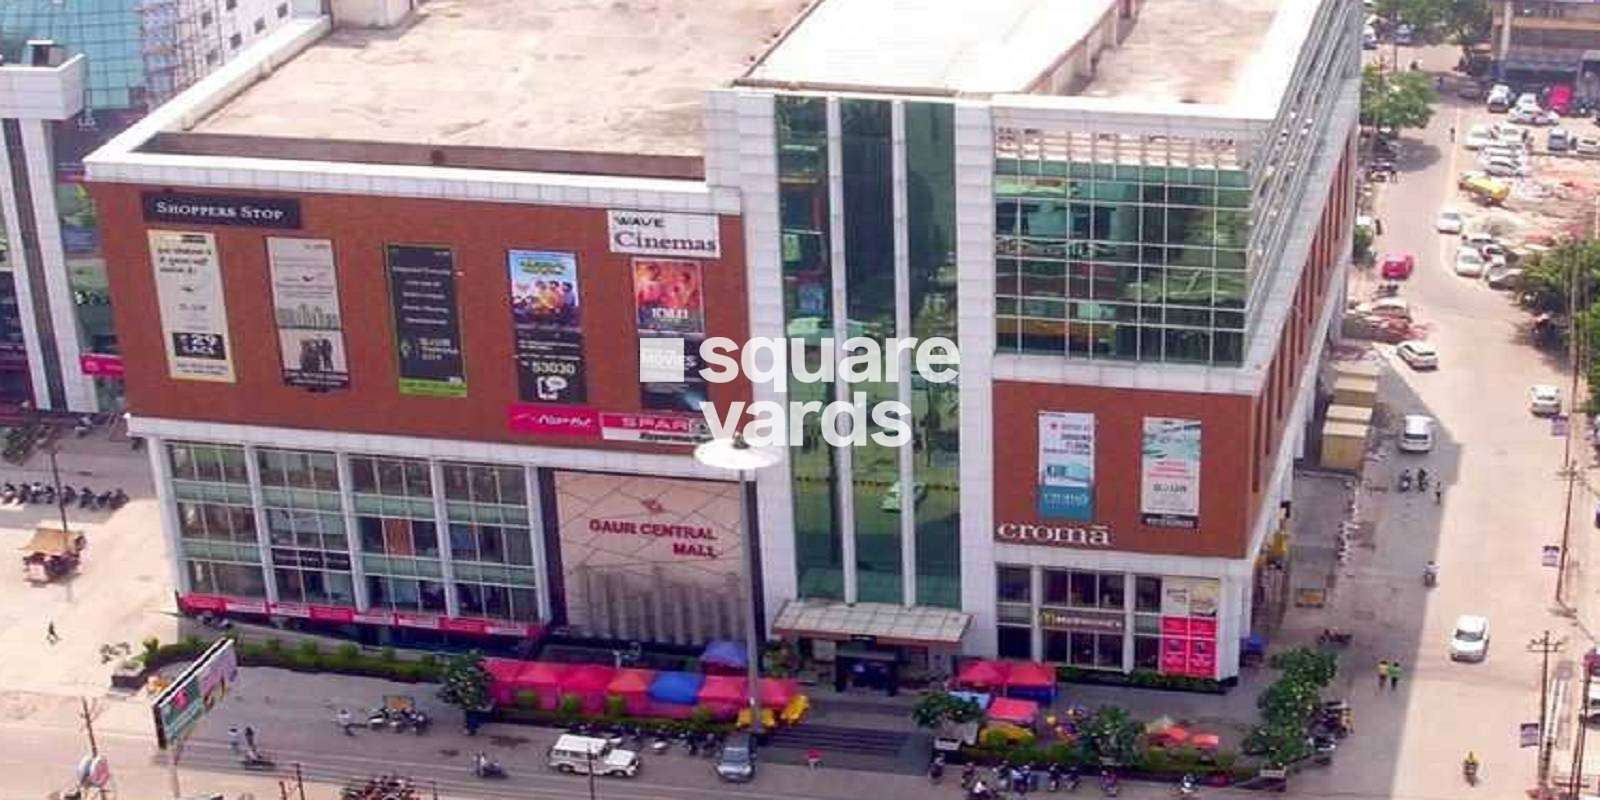 Gaur Central Mall Cover Image